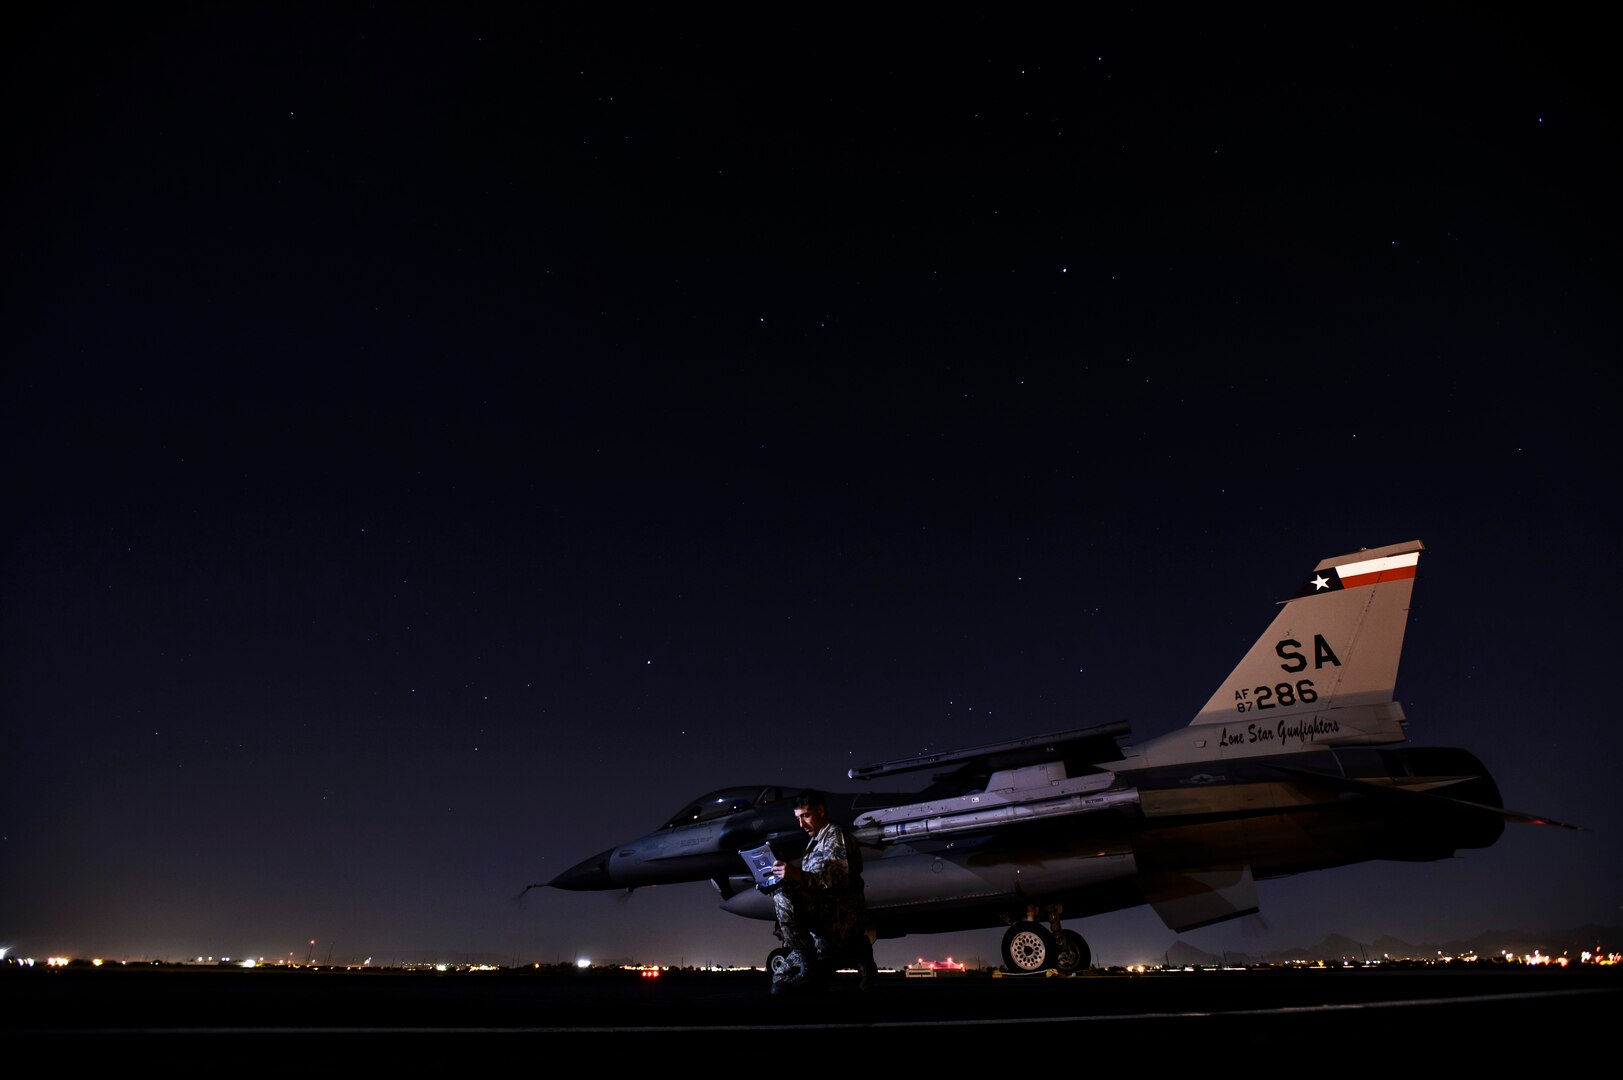 Tech Sgt. Larry Esquivel, 149th Aircraft Maintenance Squadron electroenvironmental technician, reviews technical orders for an F-16C Fighting Falcon at Davis-Monthan Air Force Base, Ariz., April 13, 2014. Coronet Cactus exercise provides realistic combat training for student fighter pilots from air-to-air combat to dropping inert and live ordnance. (U.S. Air Force photo/ Staff Sgt. Jonathan Snyder)